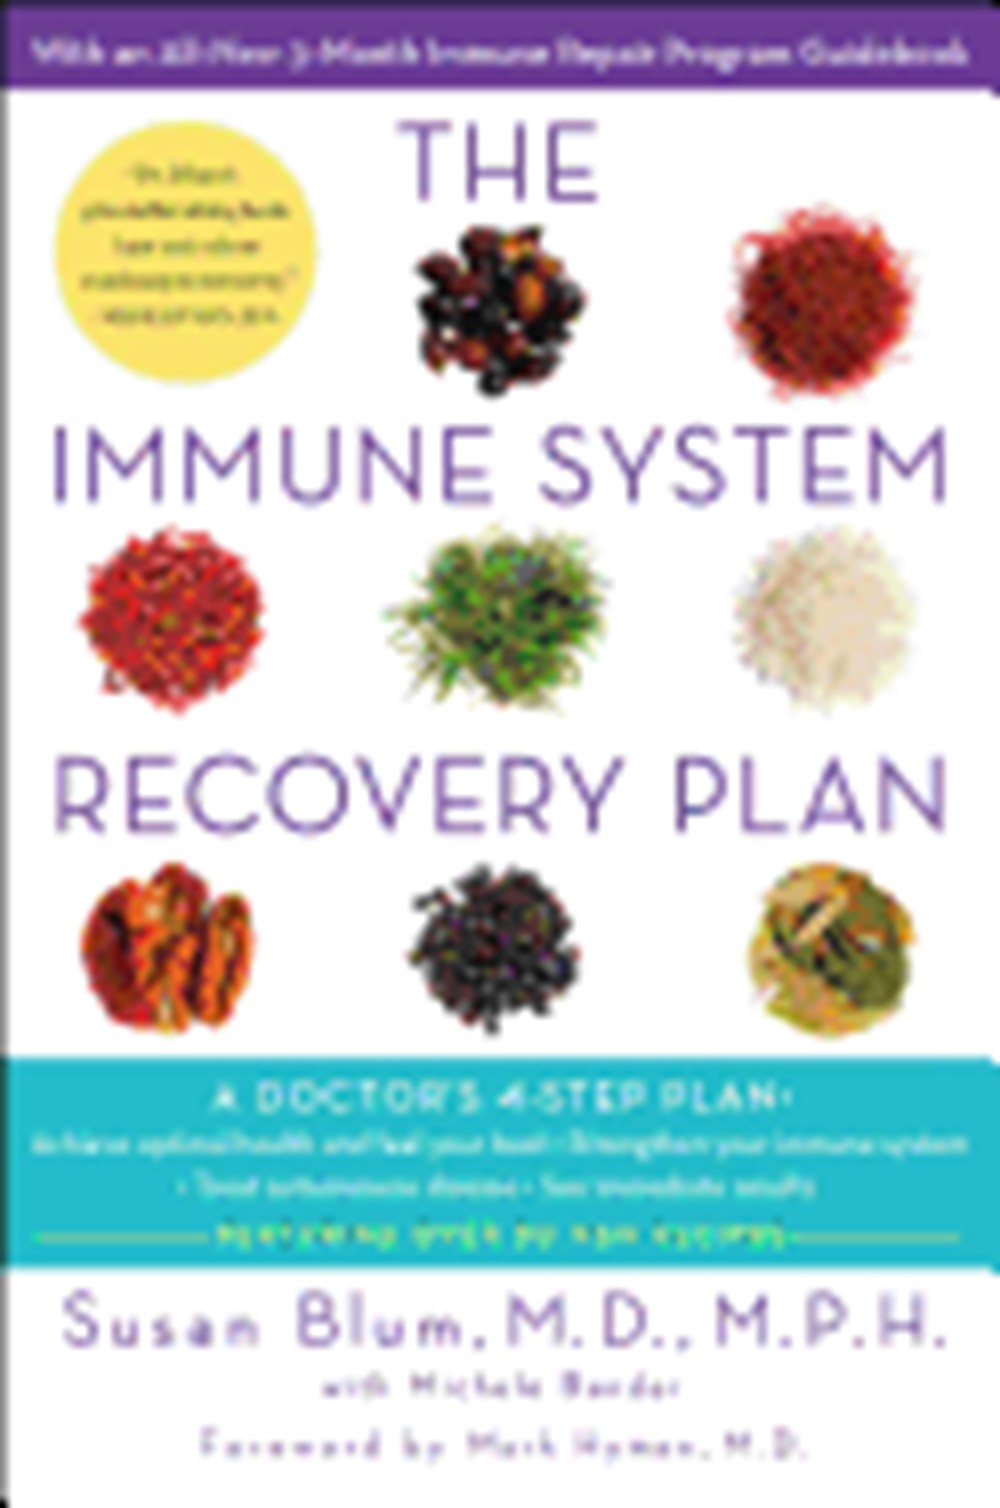 Immune System Recovery Plan A Doctor's 4-Step Program to Treat Autoimmune Disease